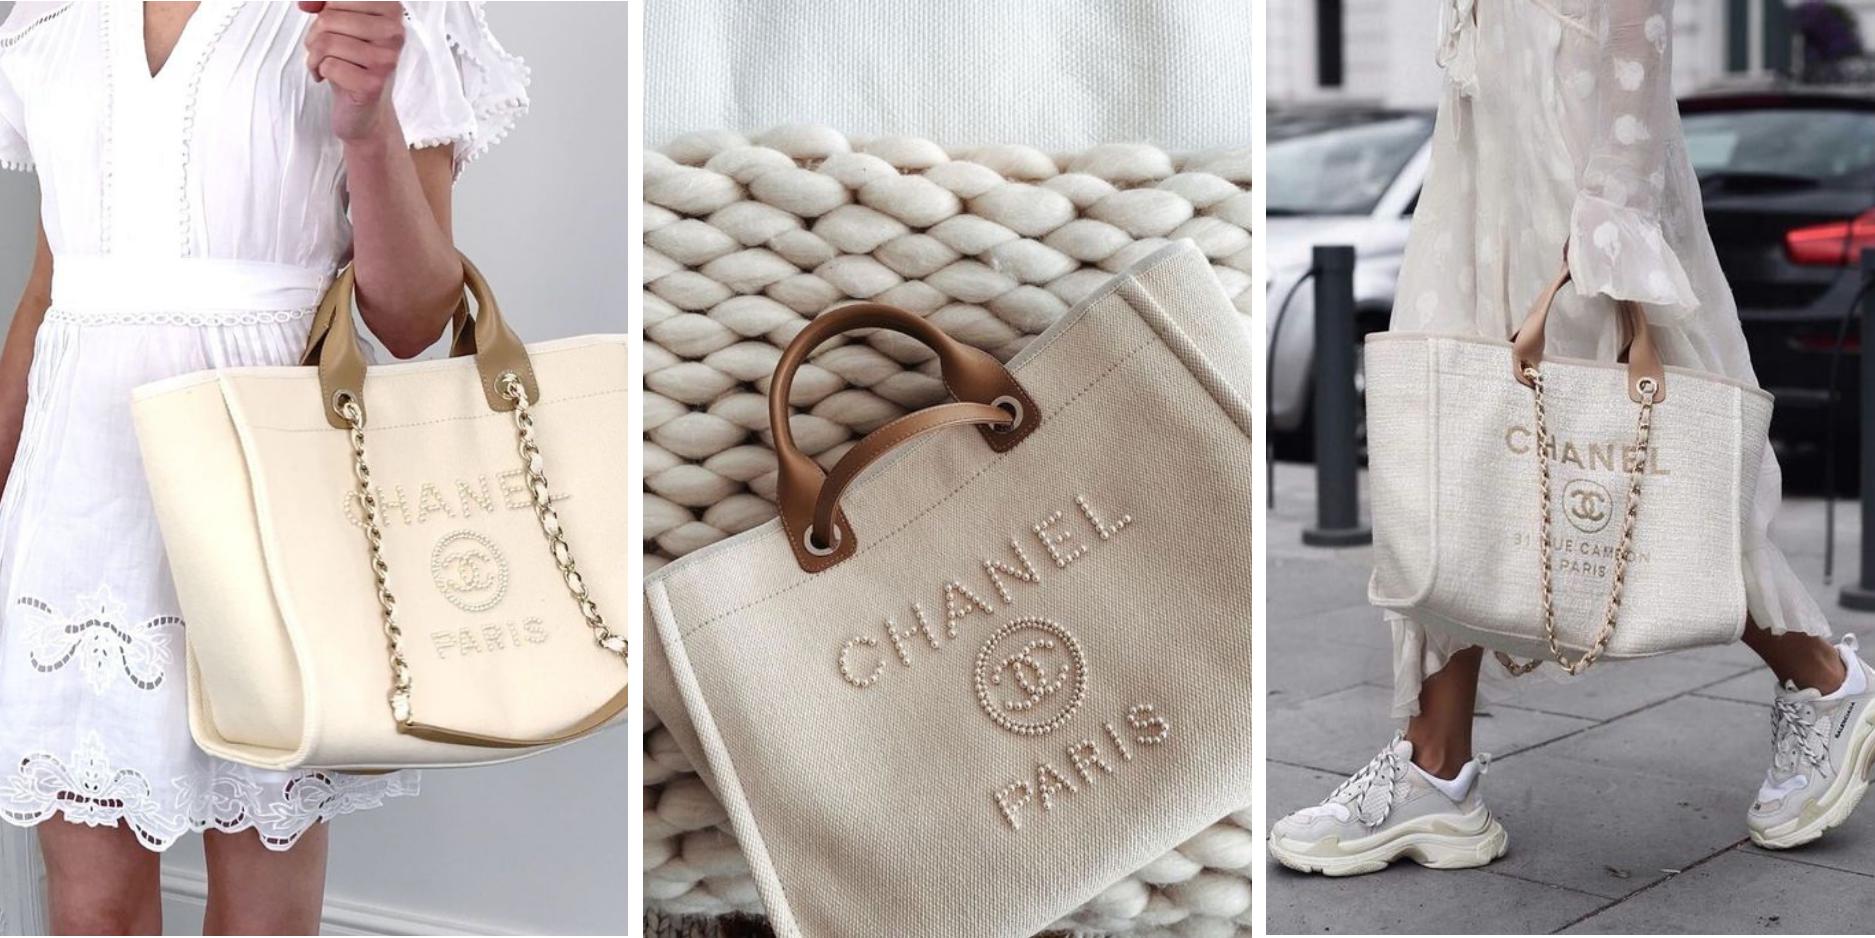 Chanel Deauville